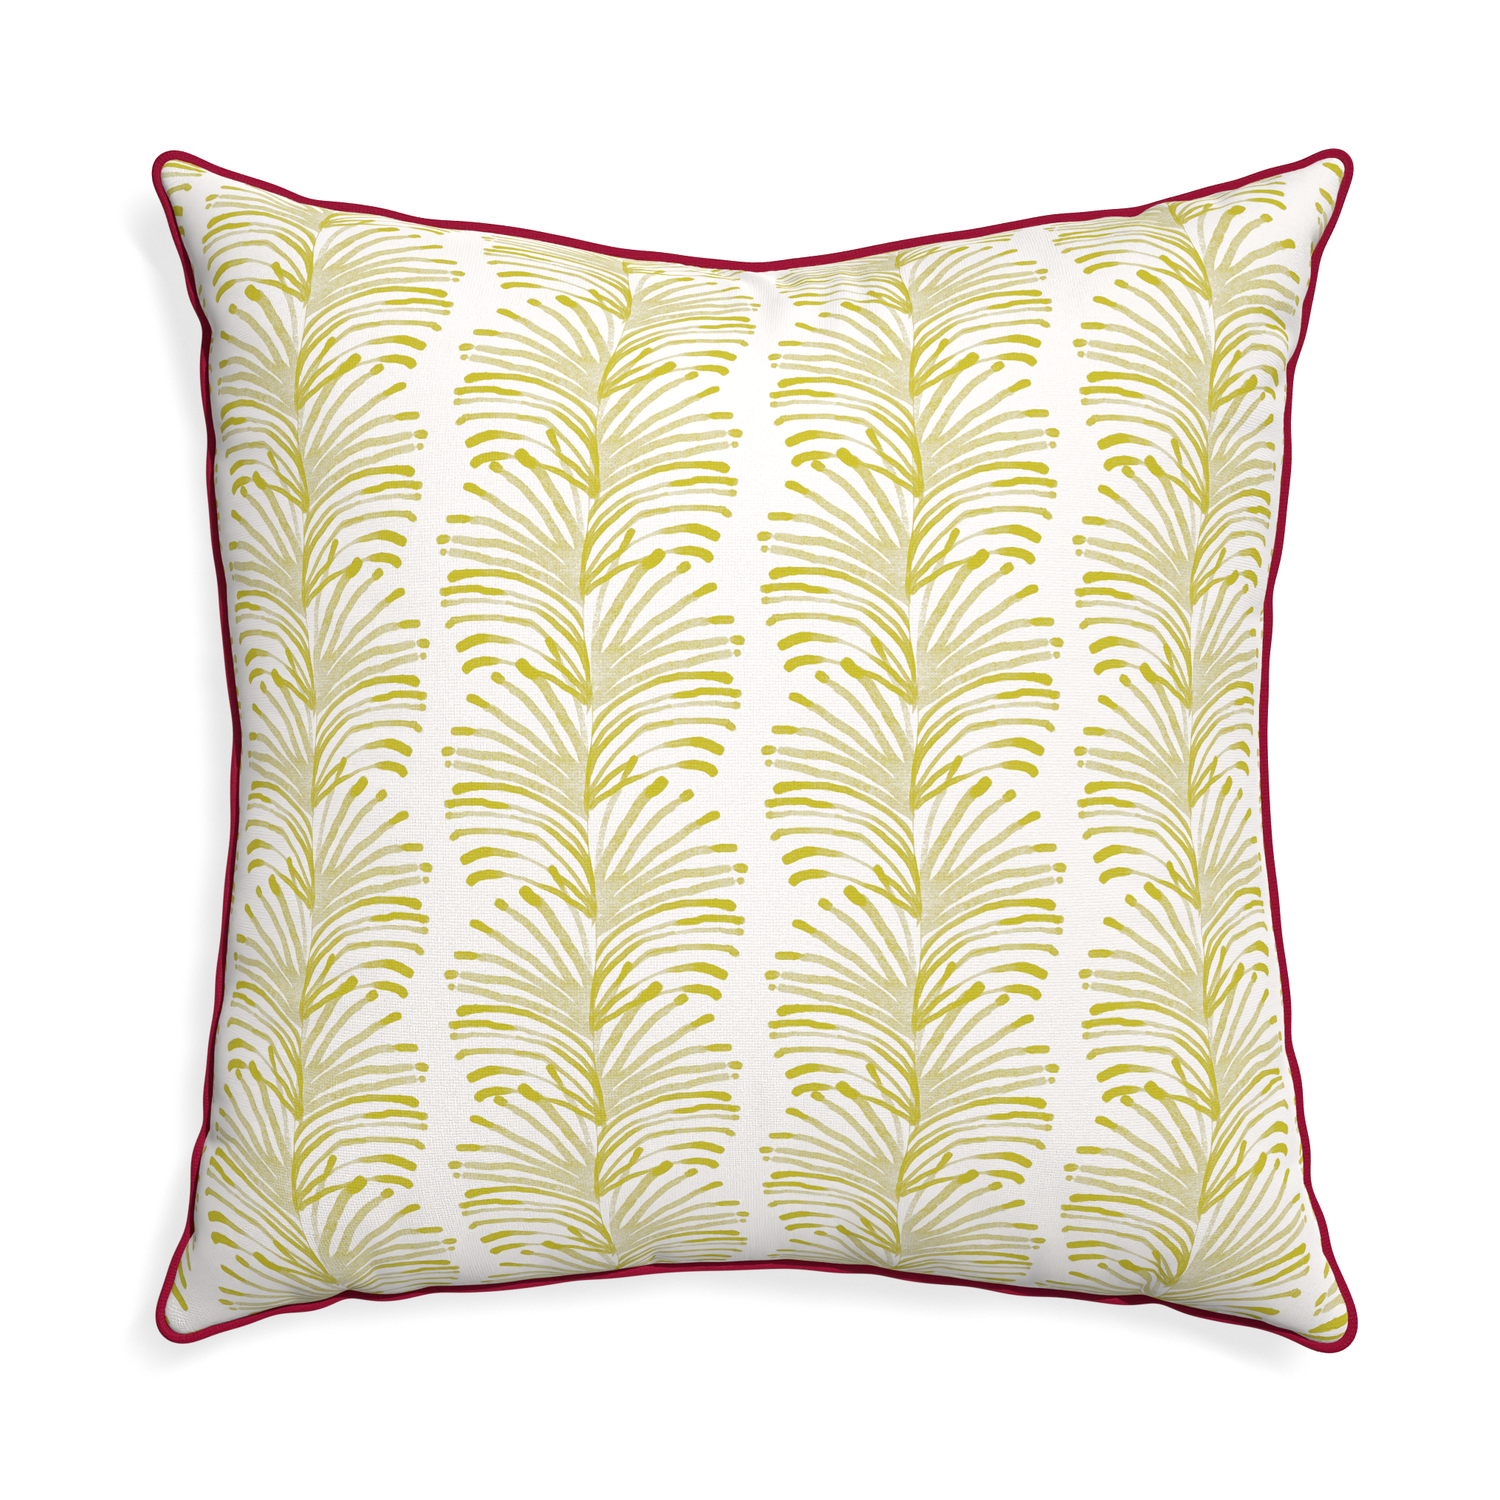 Euro-sham emma chartreuse custom pillow with raspberry piping on white background